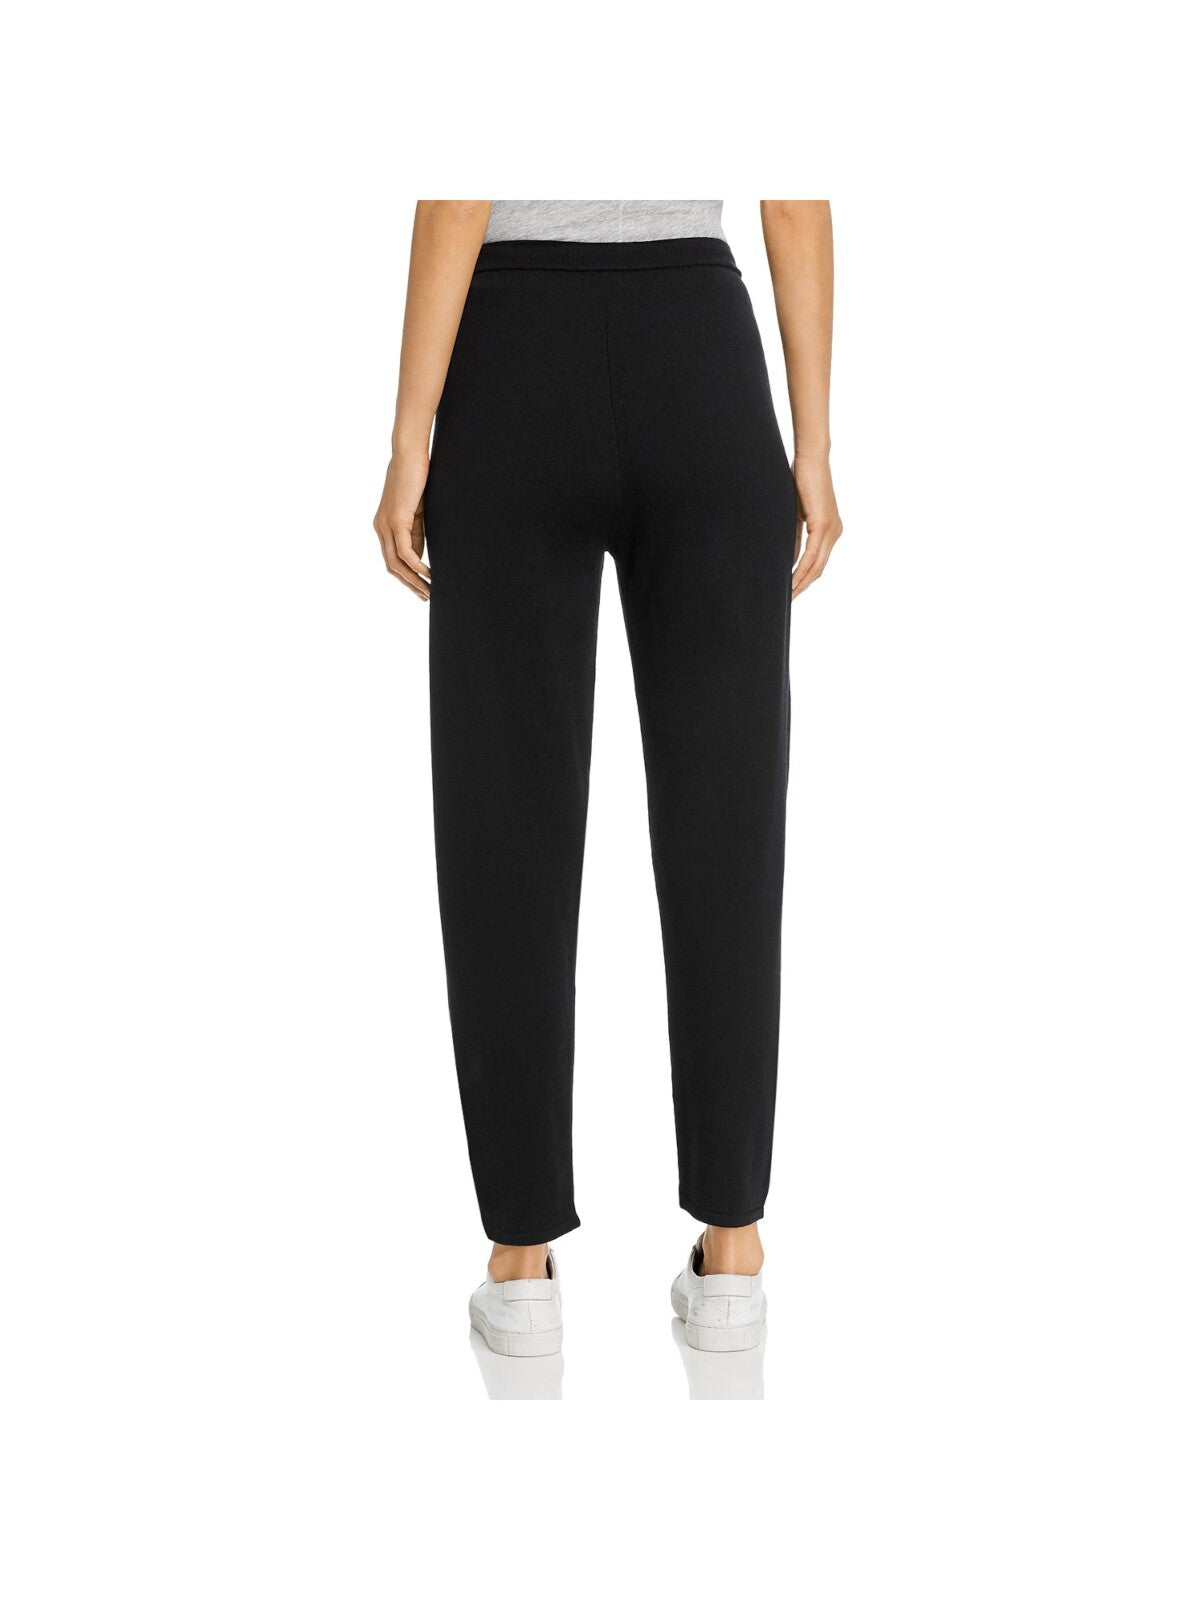 EILEEN FISHER Womens Black Pocketed Tie Jogger Pants Petites PL